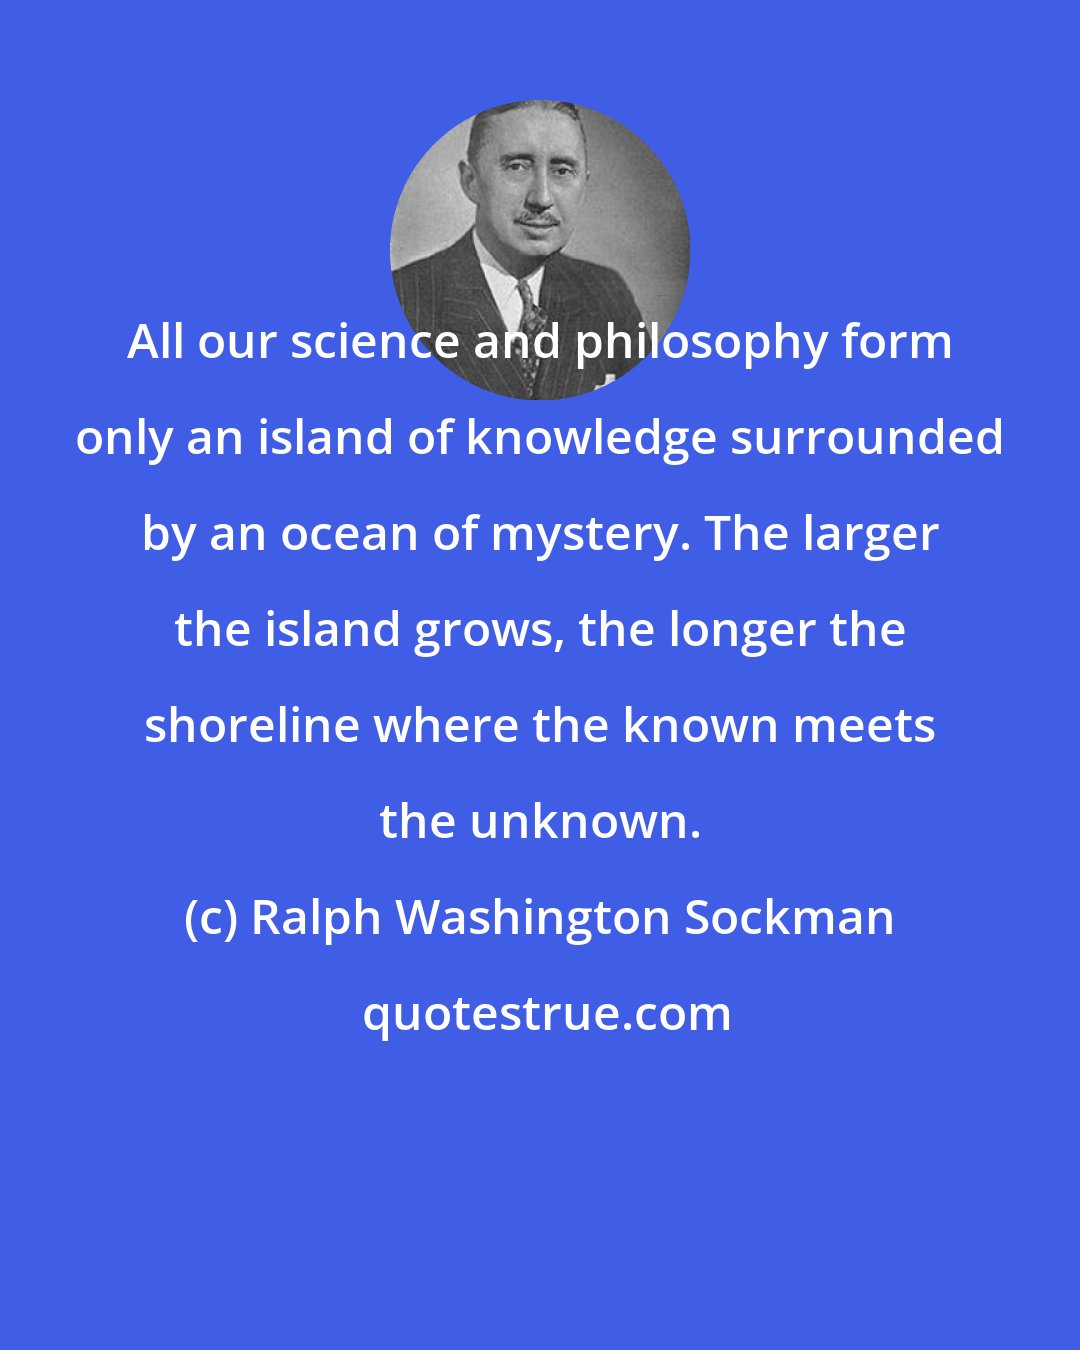 Ralph Washington Sockman: All our science and philosophy form only an island of knowledge surrounded by an ocean of mystery. The larger the island grows, the longer the shoreline where the known meets the unknown.